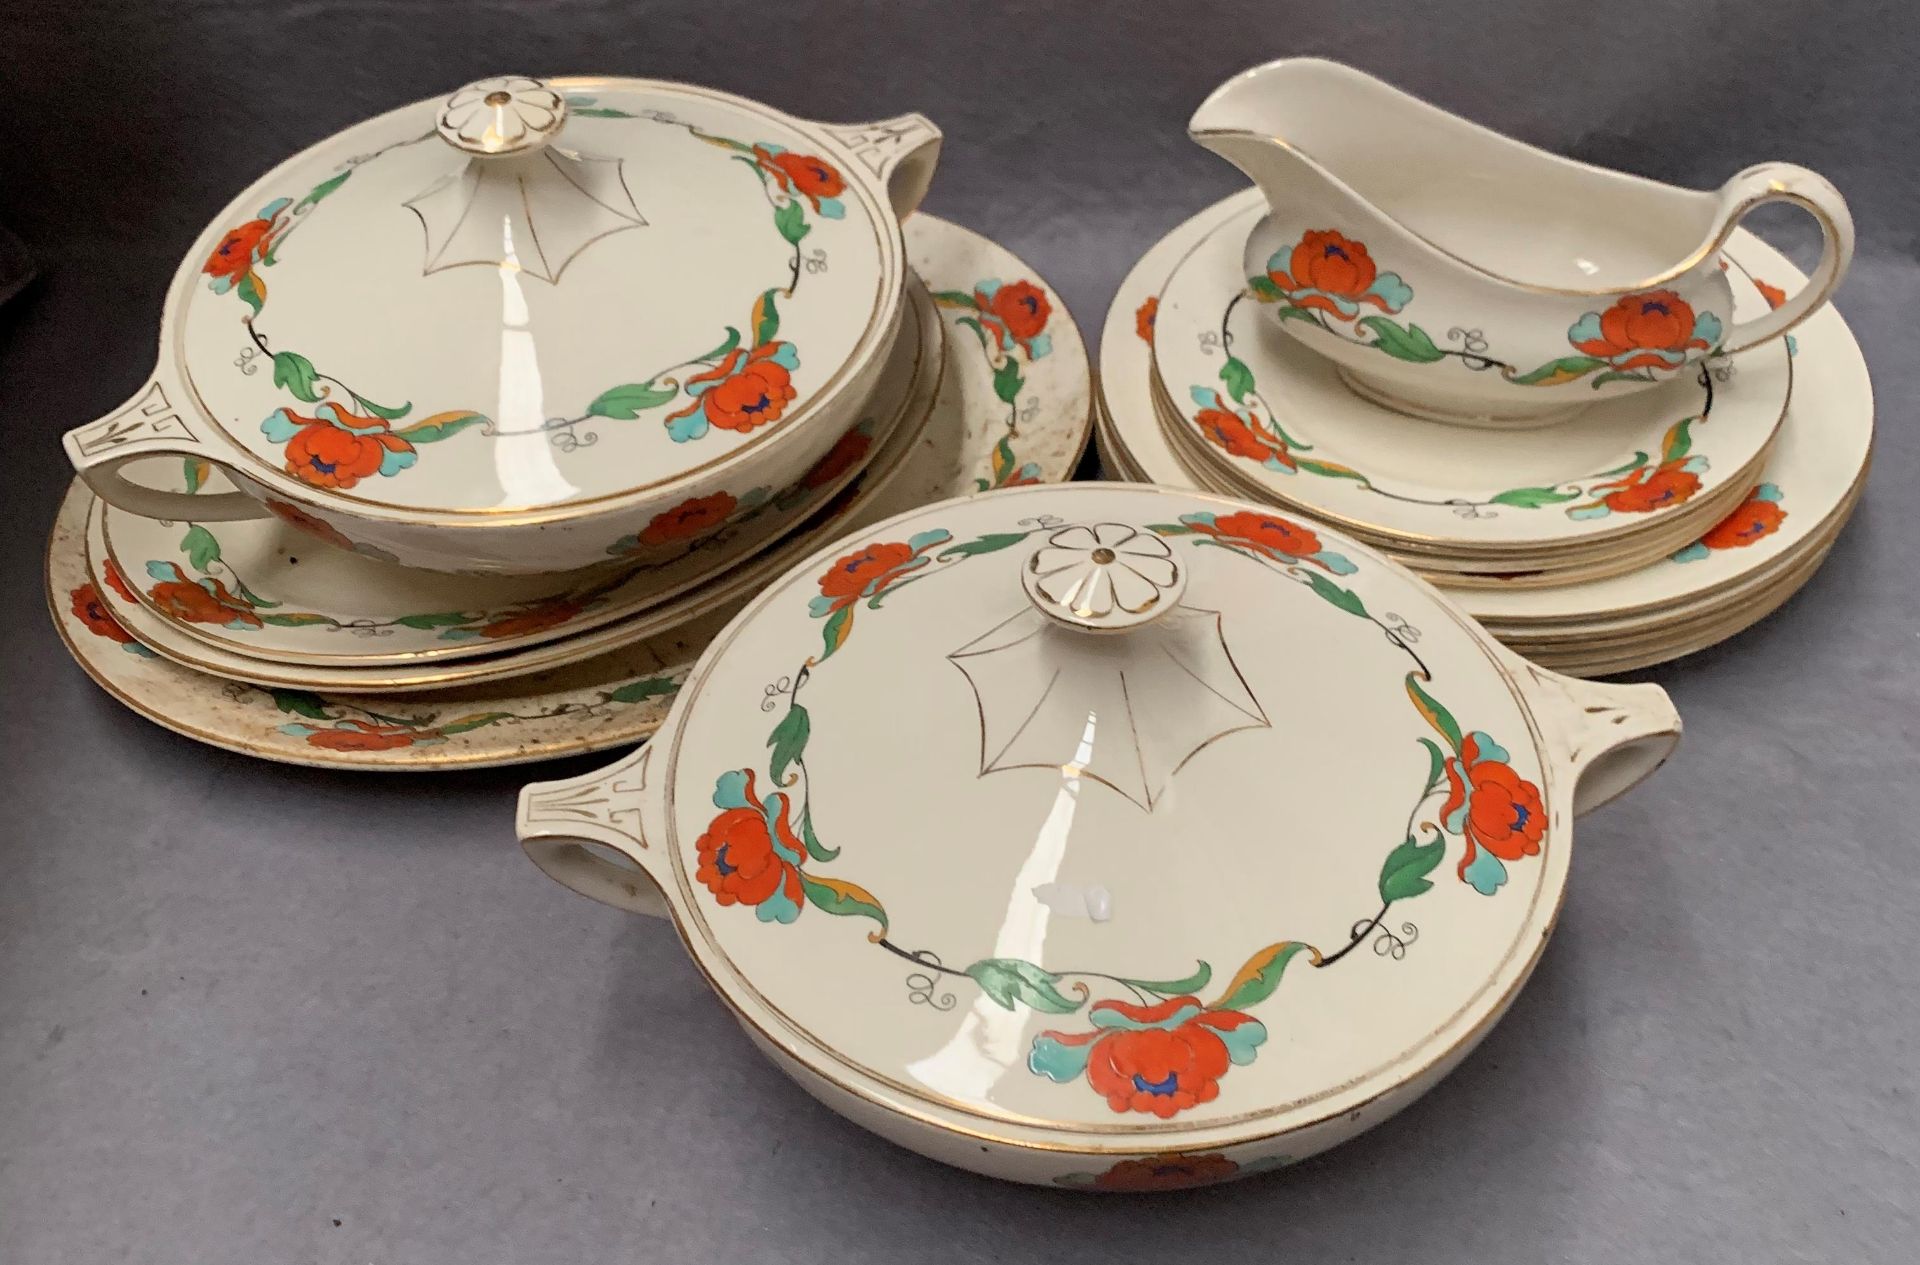 Fifteen pieces of Scotch Ivory dinner service including two tureens with covers